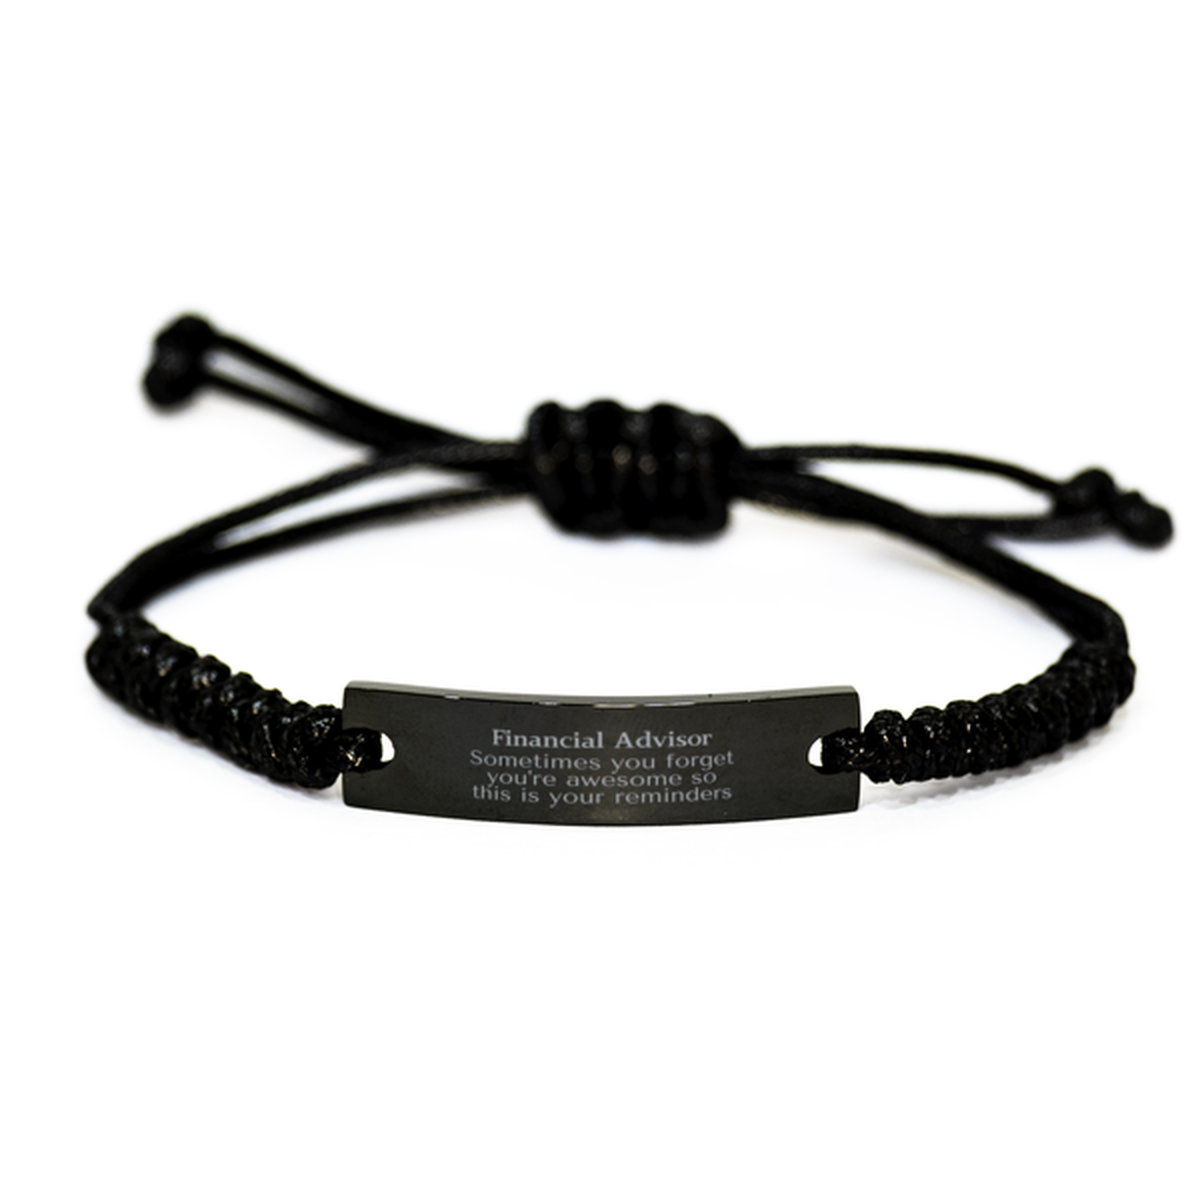 Sentimental Financial Advisor Black Rope Bracelet, Financial Advisor Sometimes you forget you're awesome so this is your reminders, Graduation Christmas Birthday Gifts for Financial Advisor, Men, Women, Coworkers